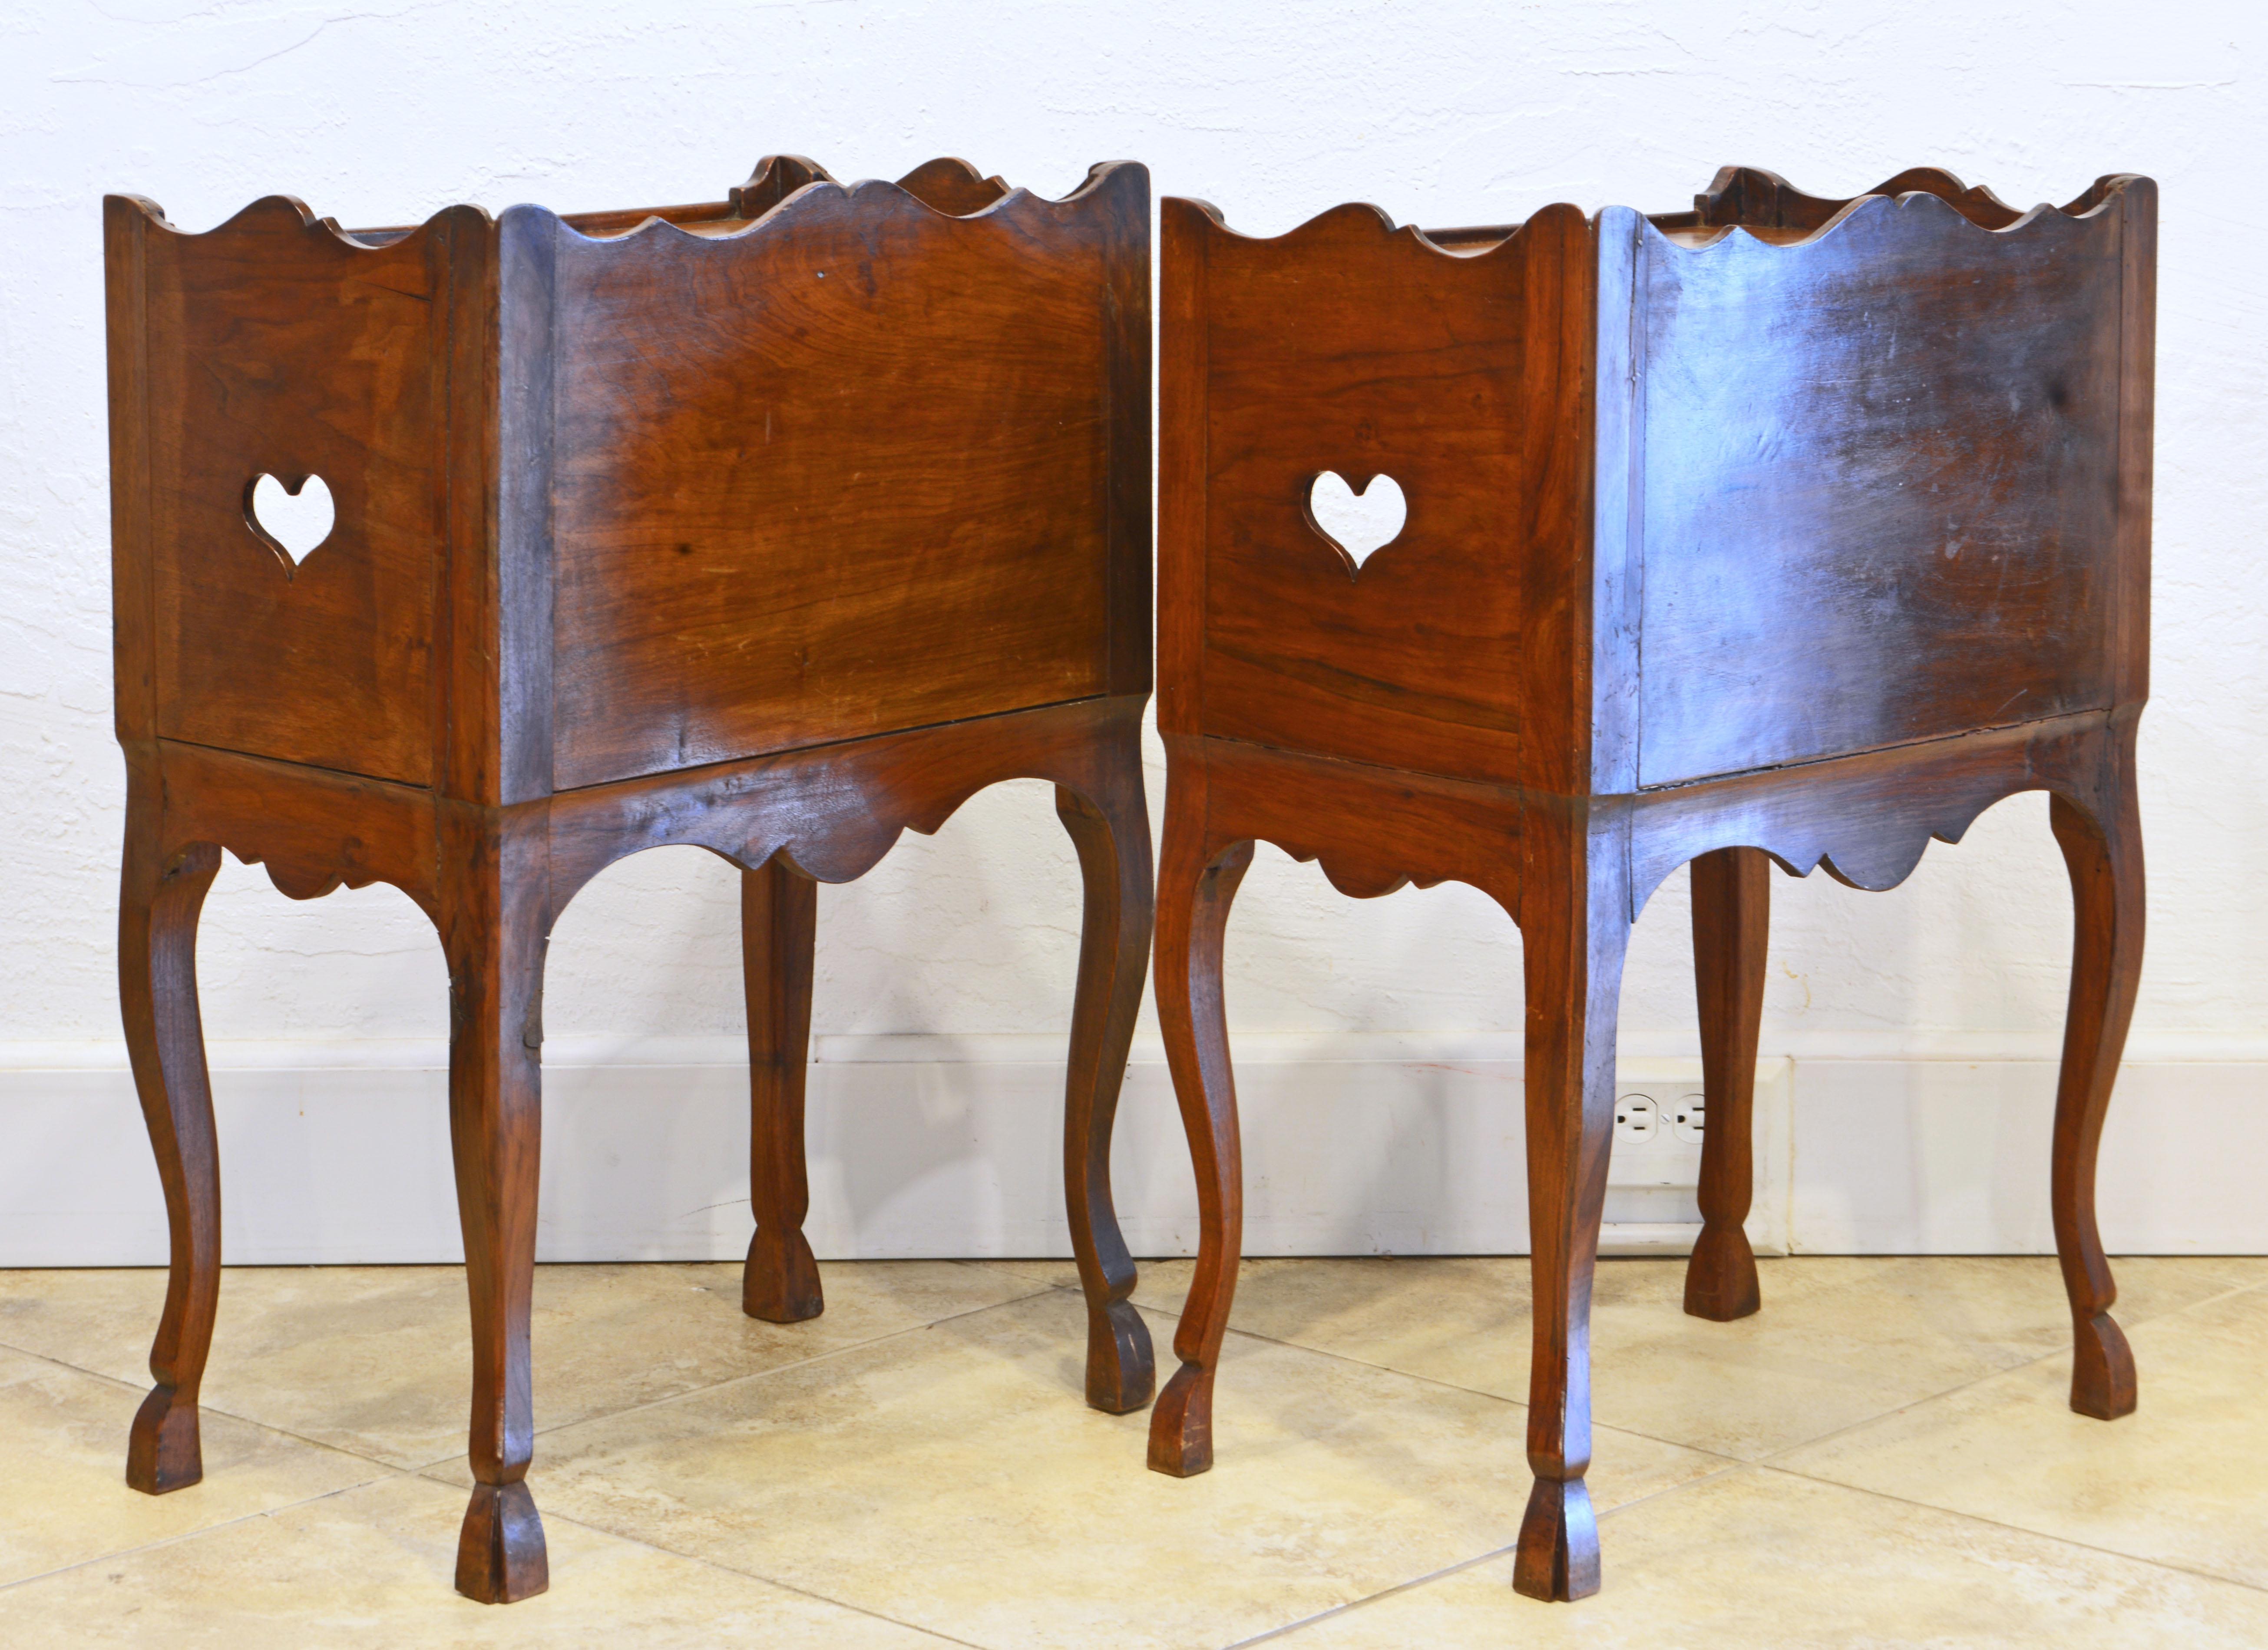 19th Century Pair of French Provincial Carved Walnut Side Tables with Concealed Drawers